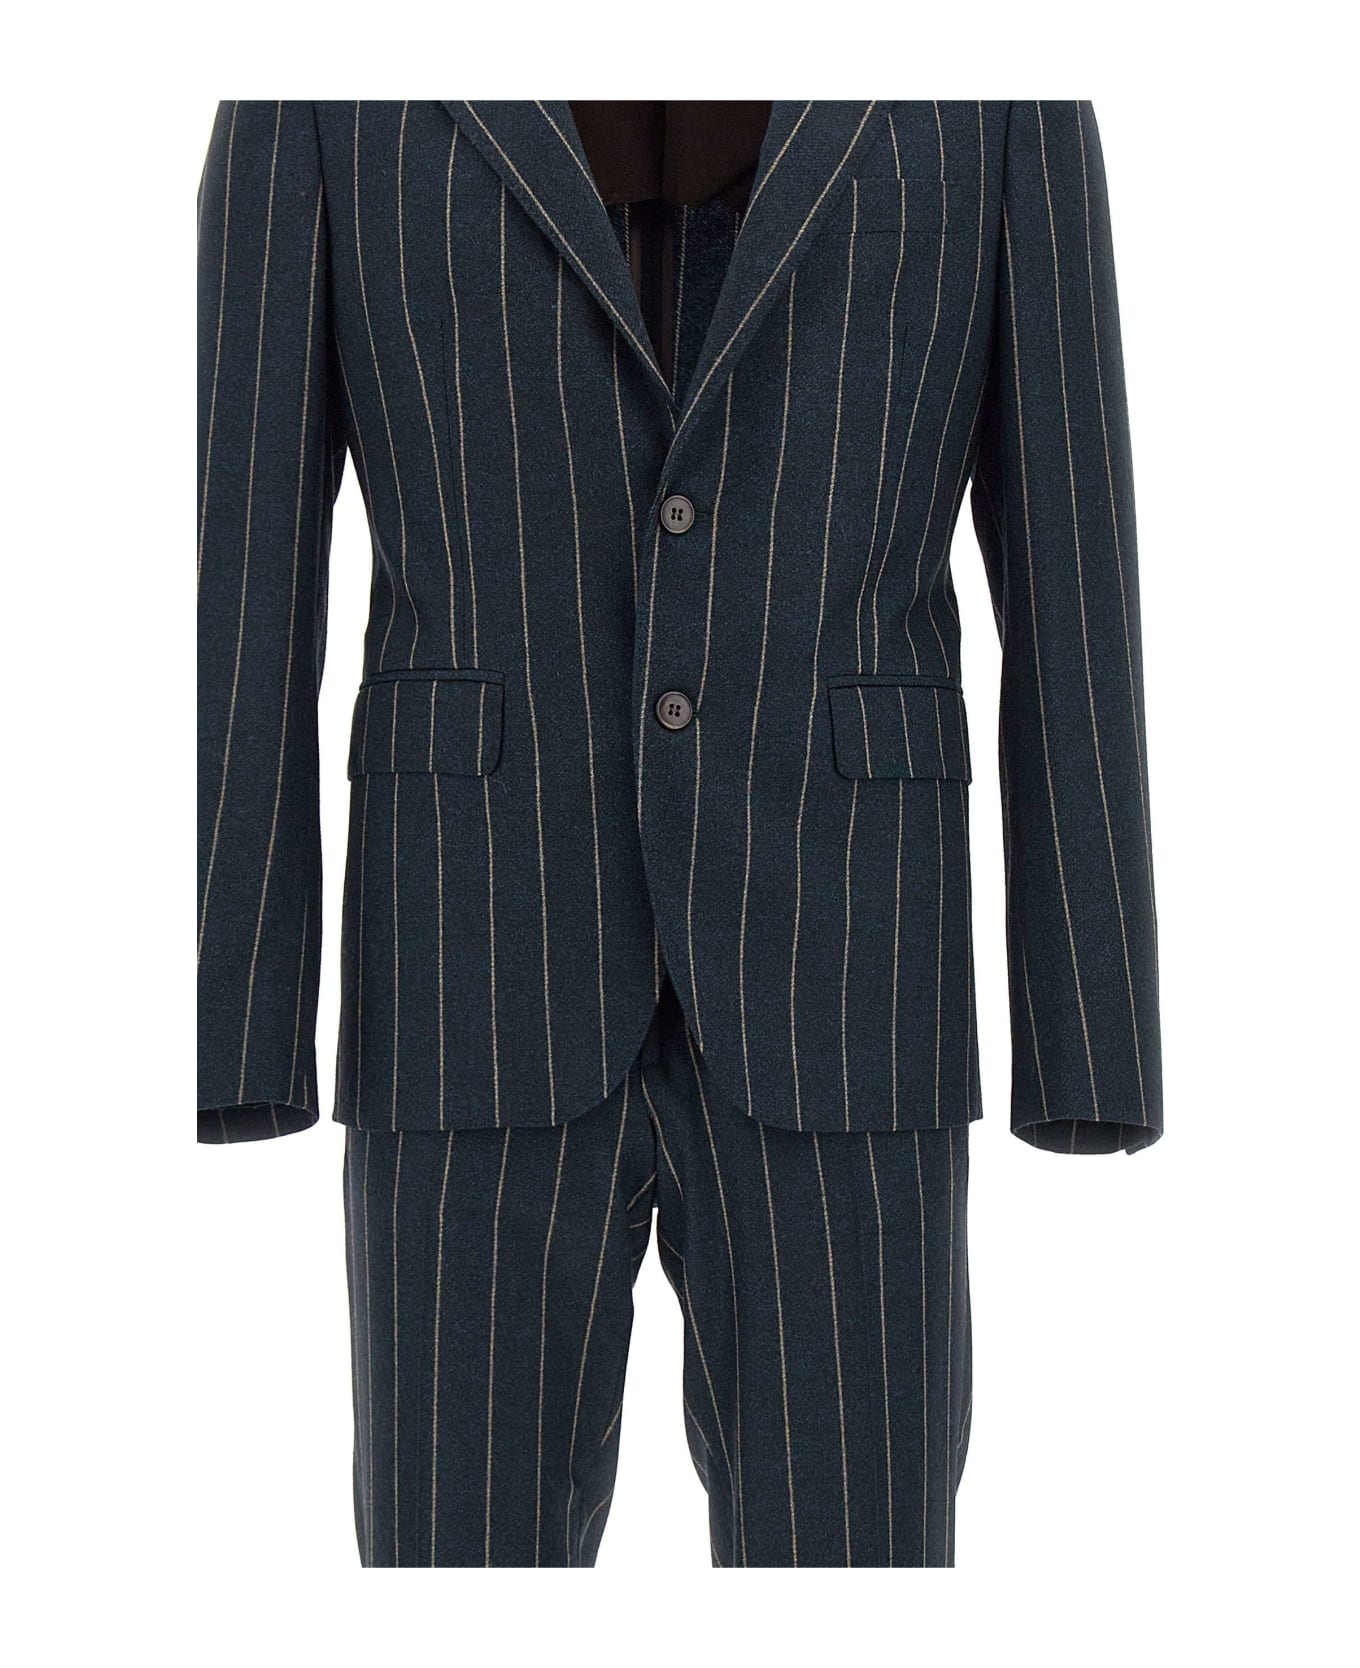 Brian Dales Wool And Cashmere Suit - BLACK